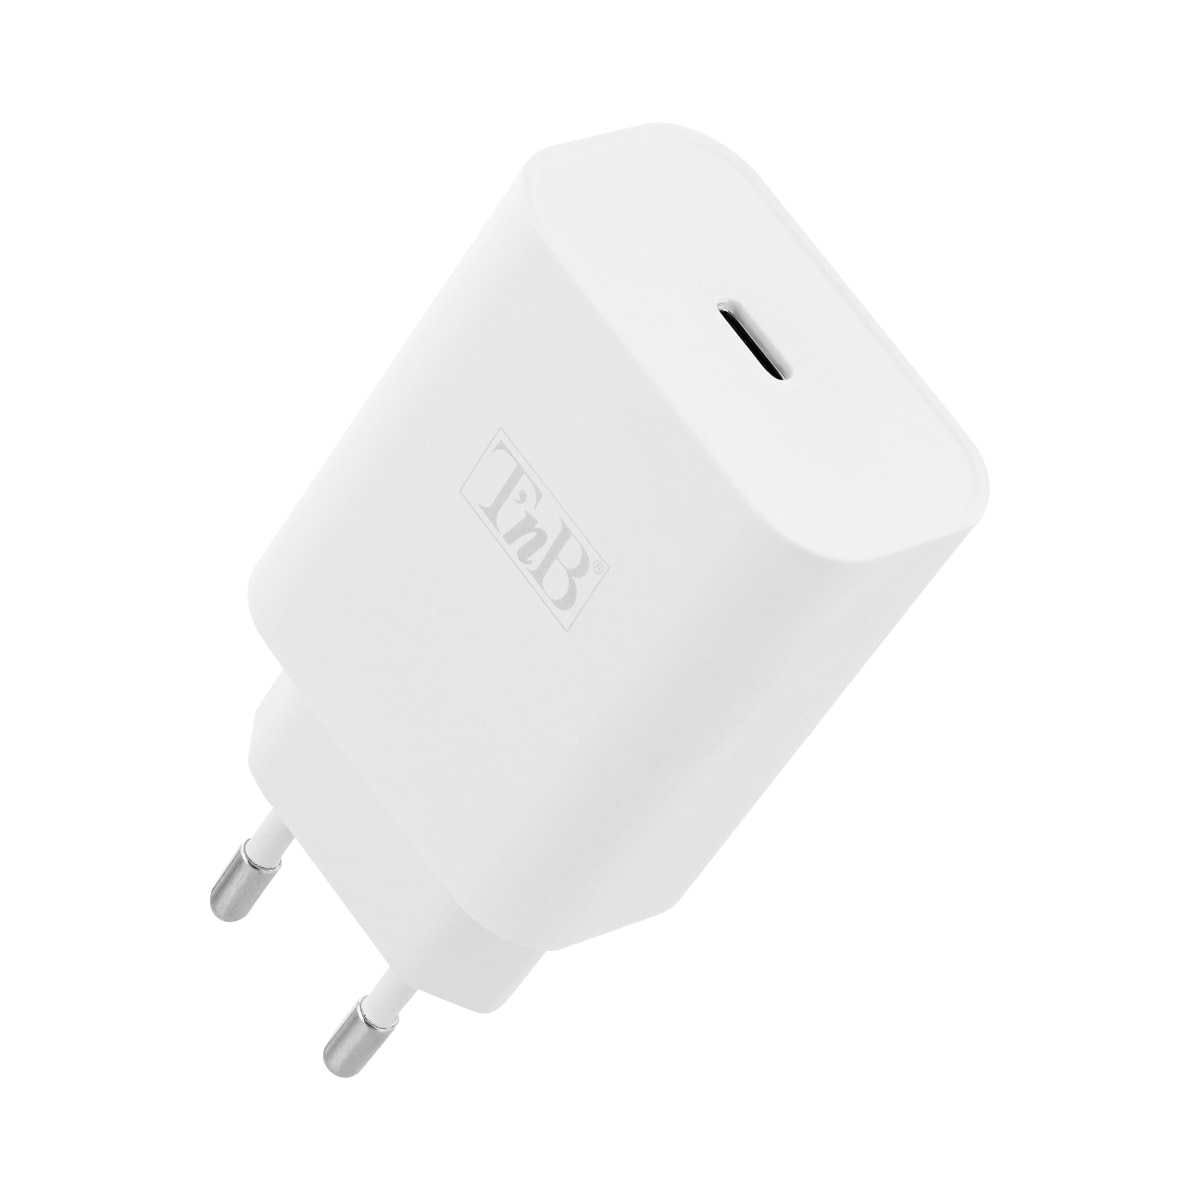 Cargador de red 1 USB-C Power Delivery + USB-A Quick Charge 30W